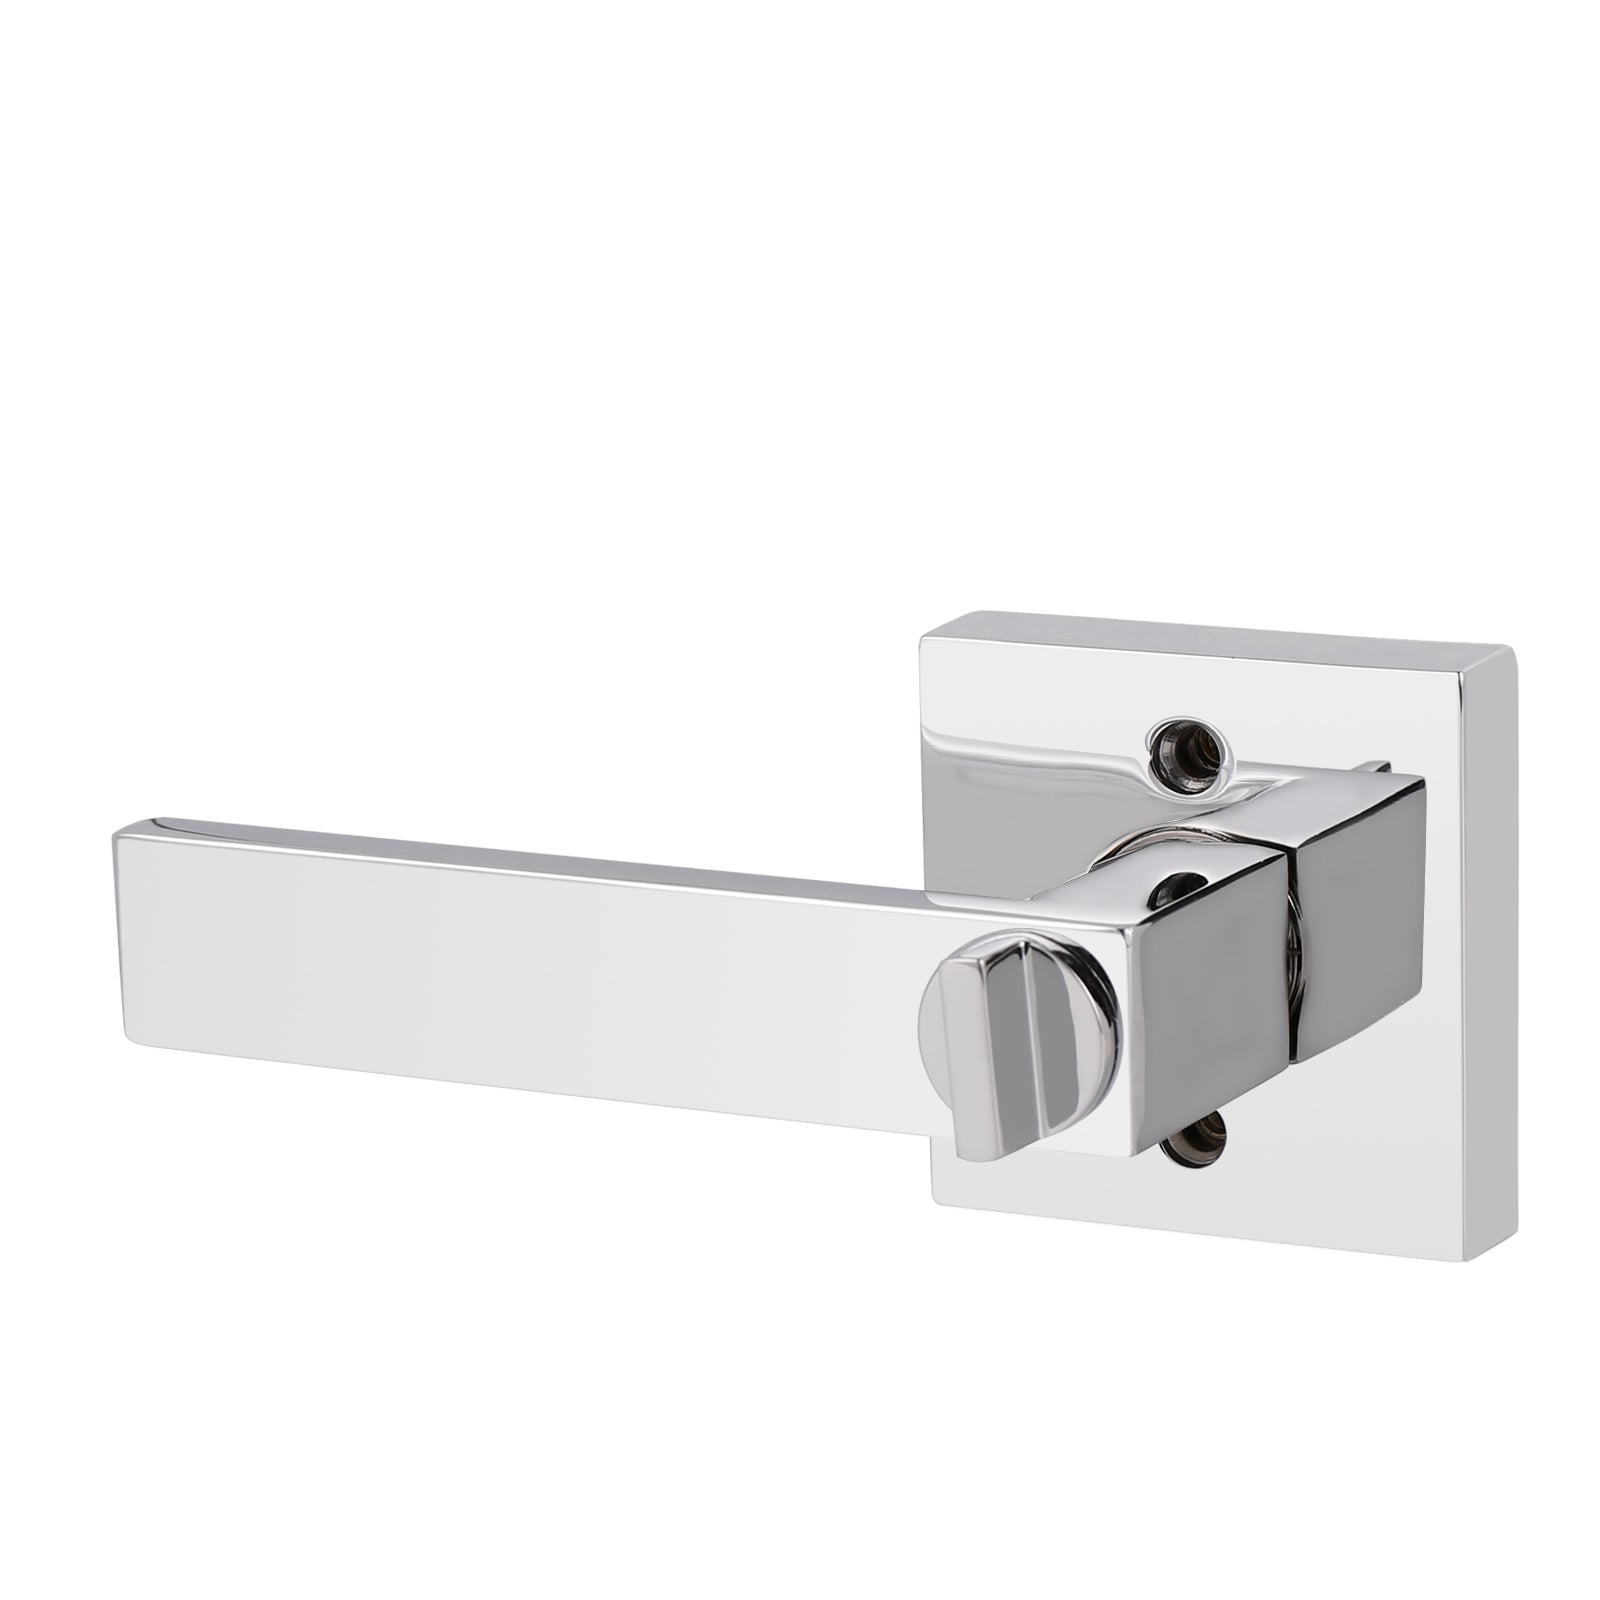 Heavy Duty Privacy Door Handles with Square Design, Polished Chrome Finish DL01PCBK